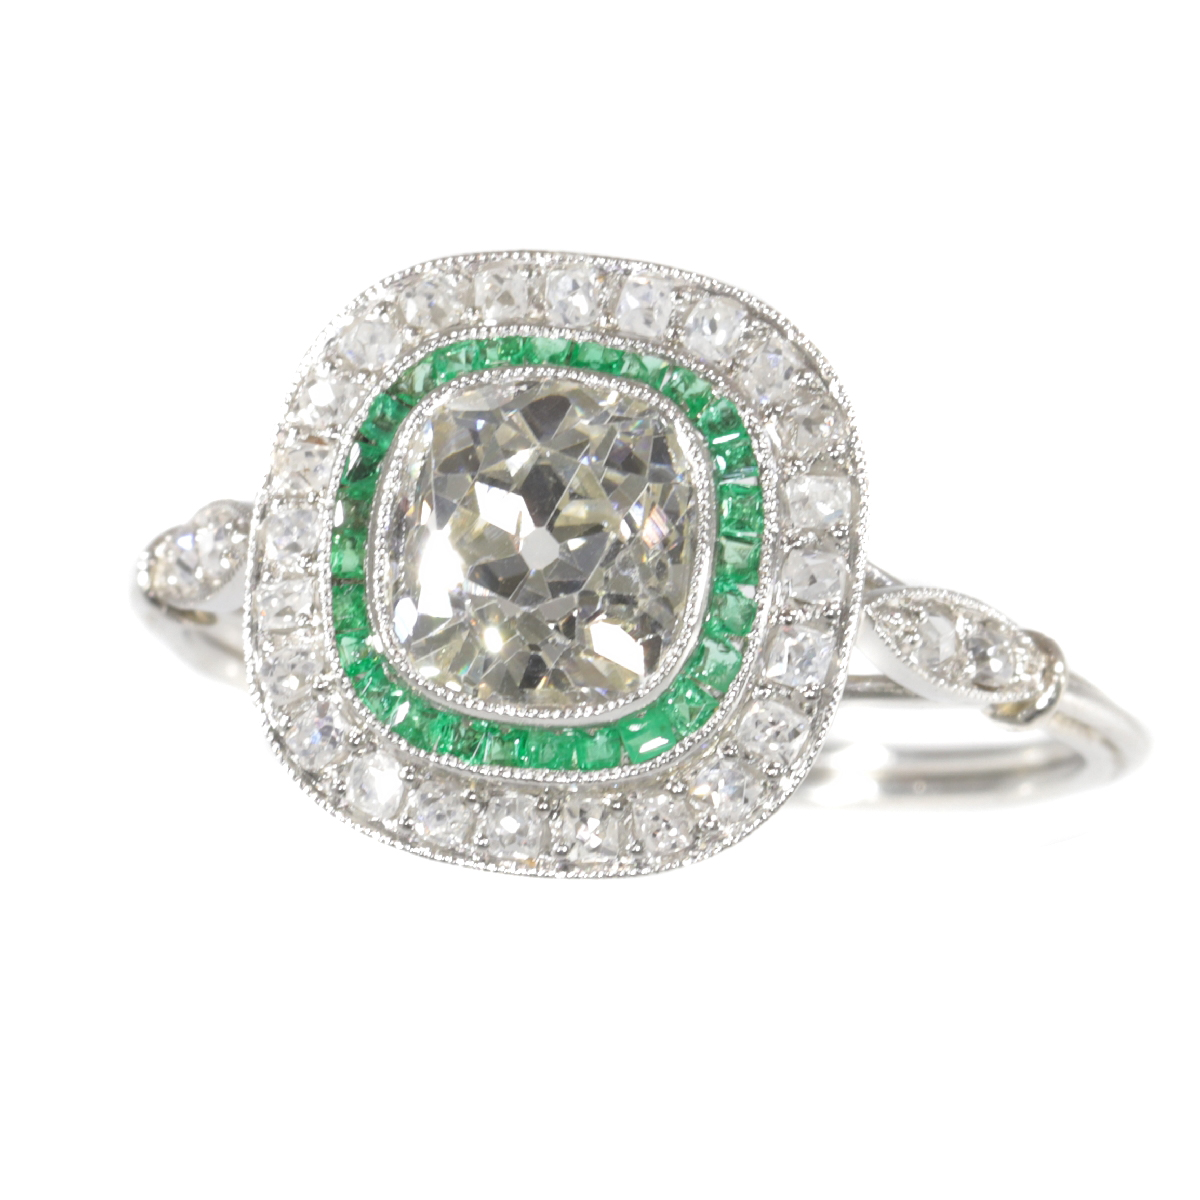 Vintage Art Deco style diamond and emerald engagement ring